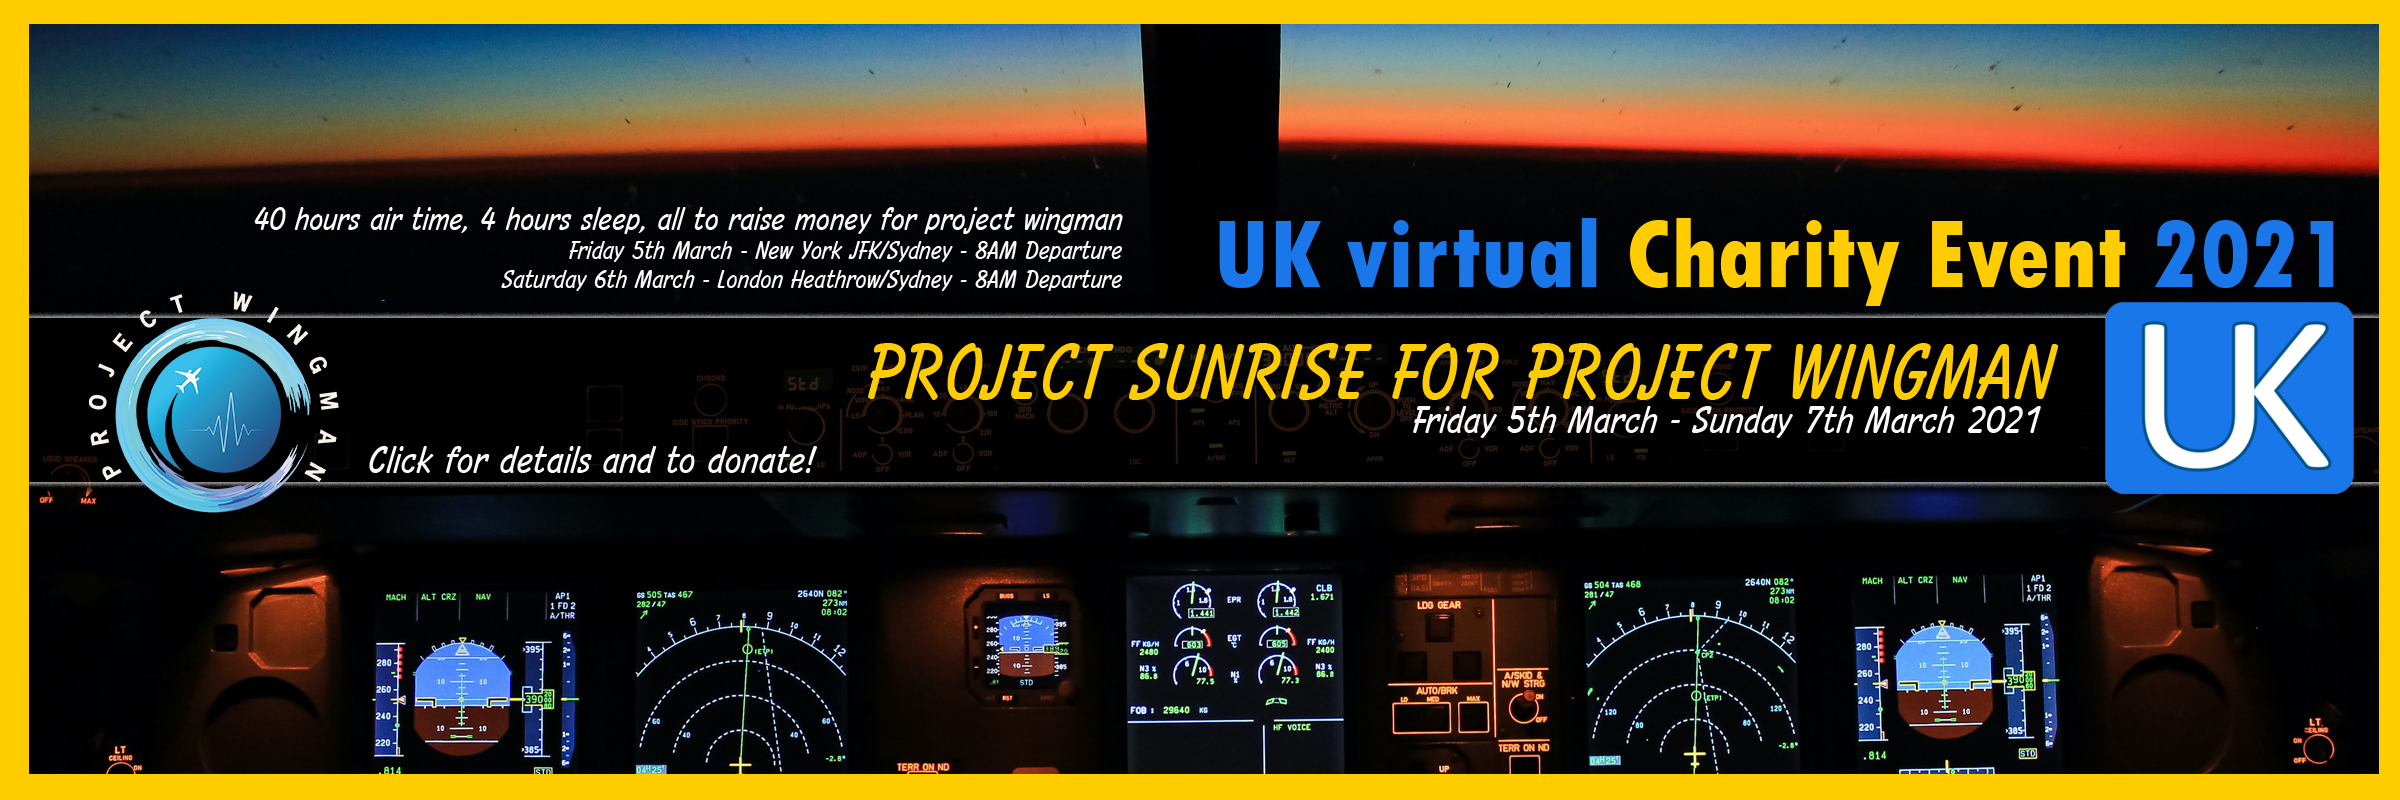 Project Sunrise for Project Wingman